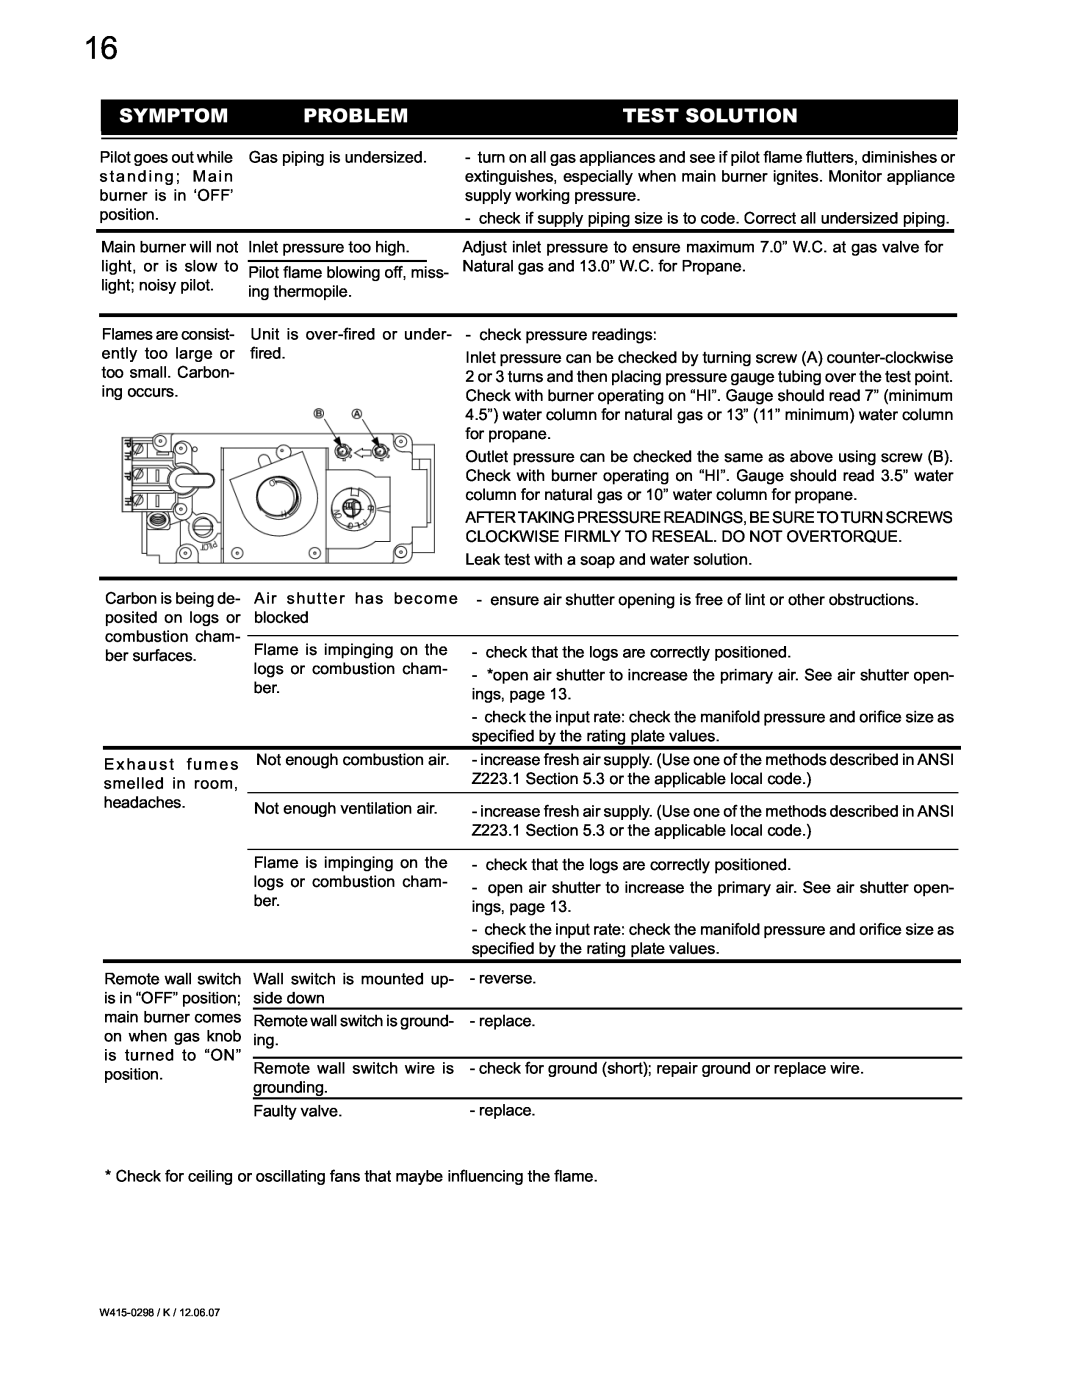 Continental CVF36N, CVF36P manual Symptom, Problem, Test Solution, Pilot goes out while 